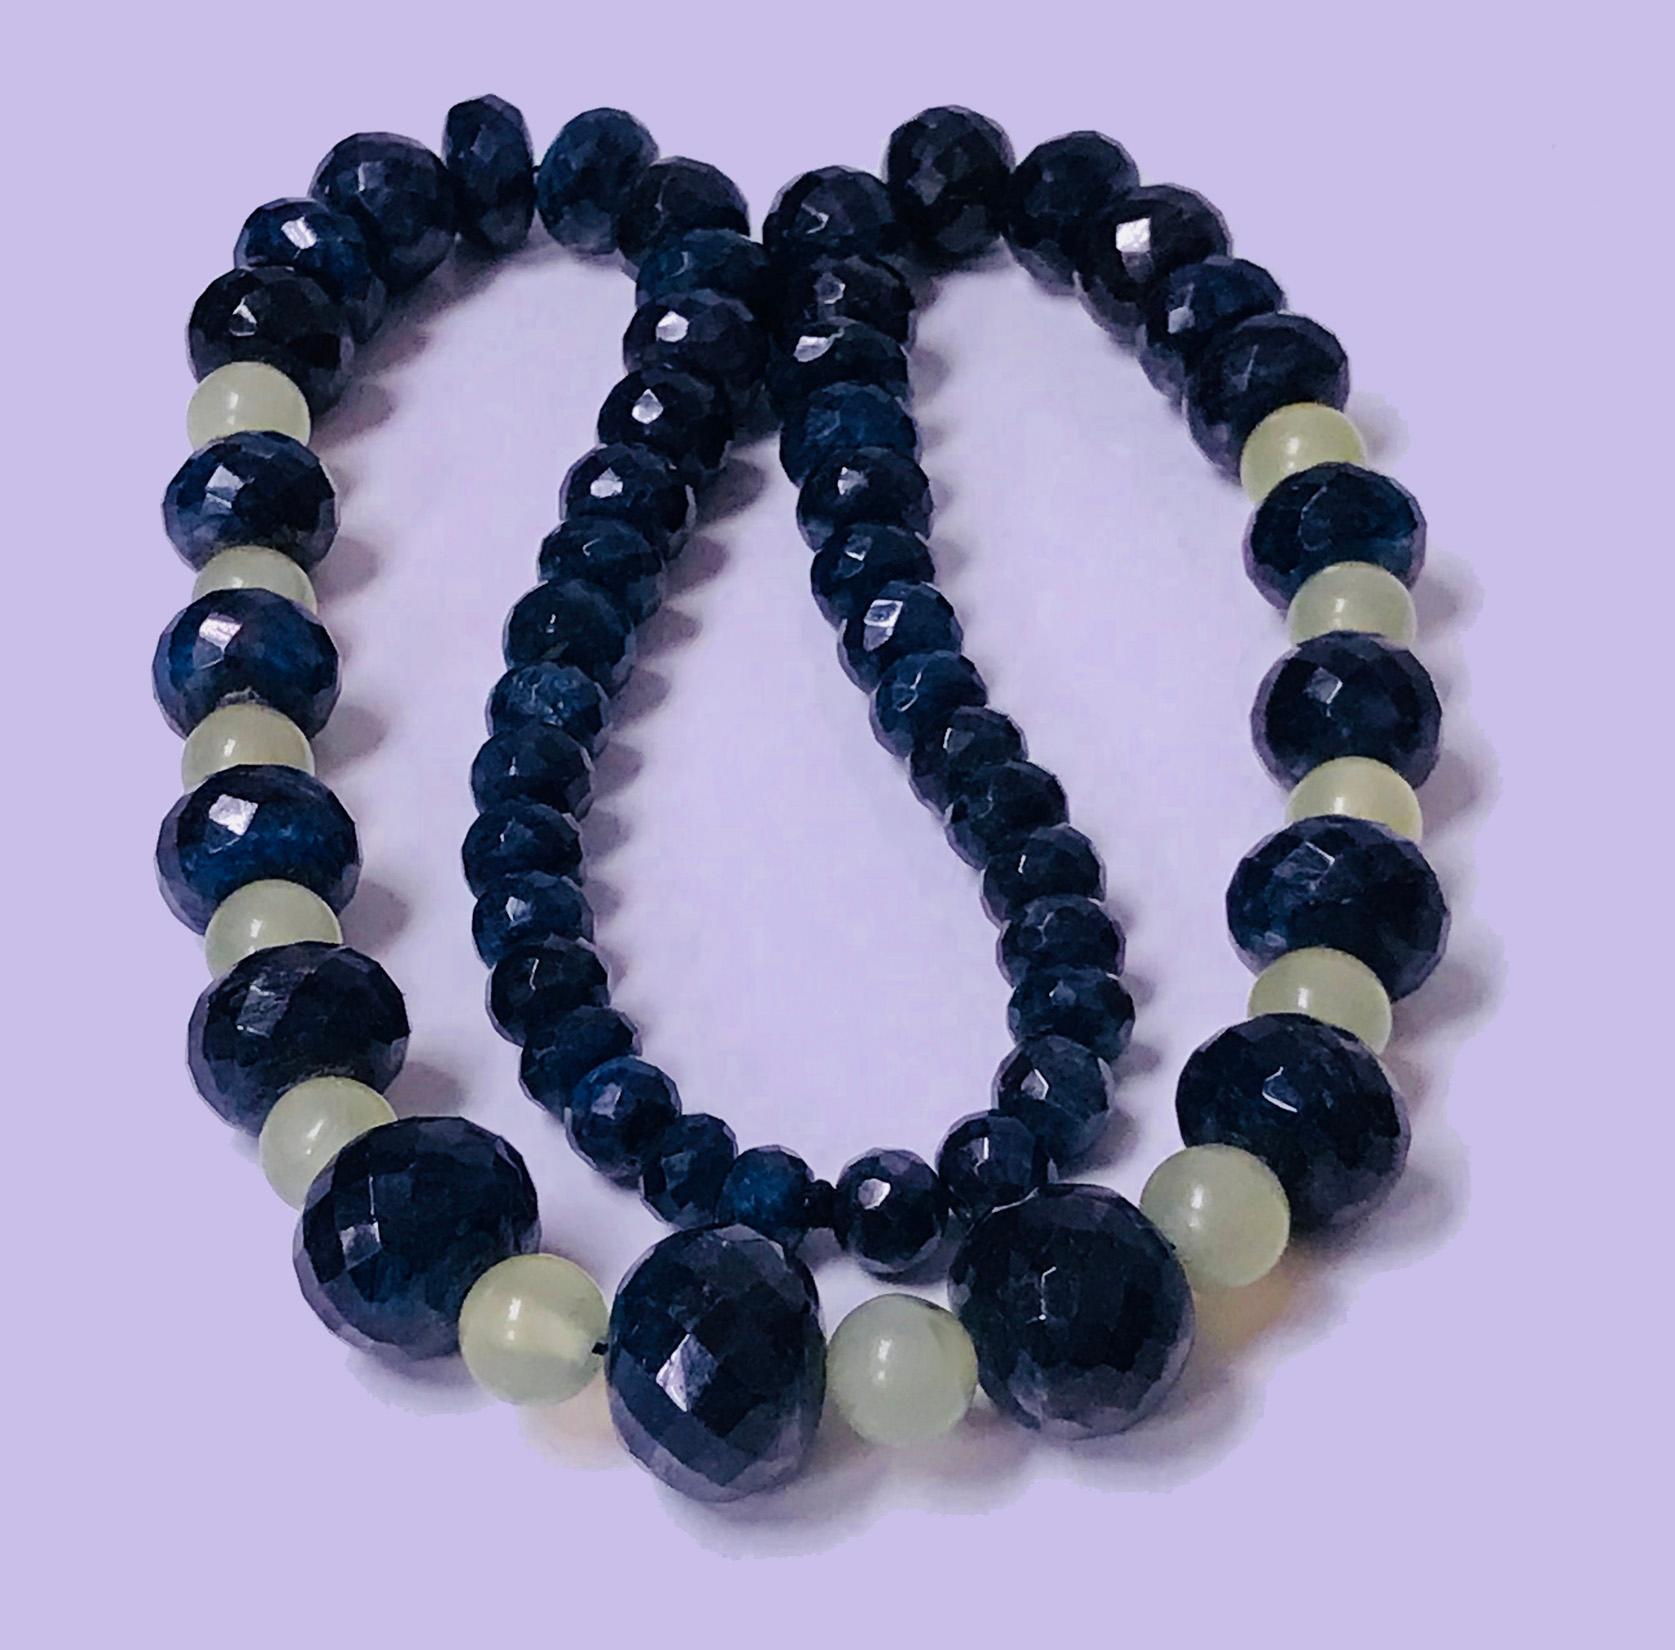 Blue Sapphire and Jade Necklace. The Necklace set with 53 rondelle faceted blue sapphire, total approximate weight 650 cts, gauging approximately 9.50 - 20.00 mm, interspaced with 12 natural light green jade, gauging approximately 11.00-11.50 mm.